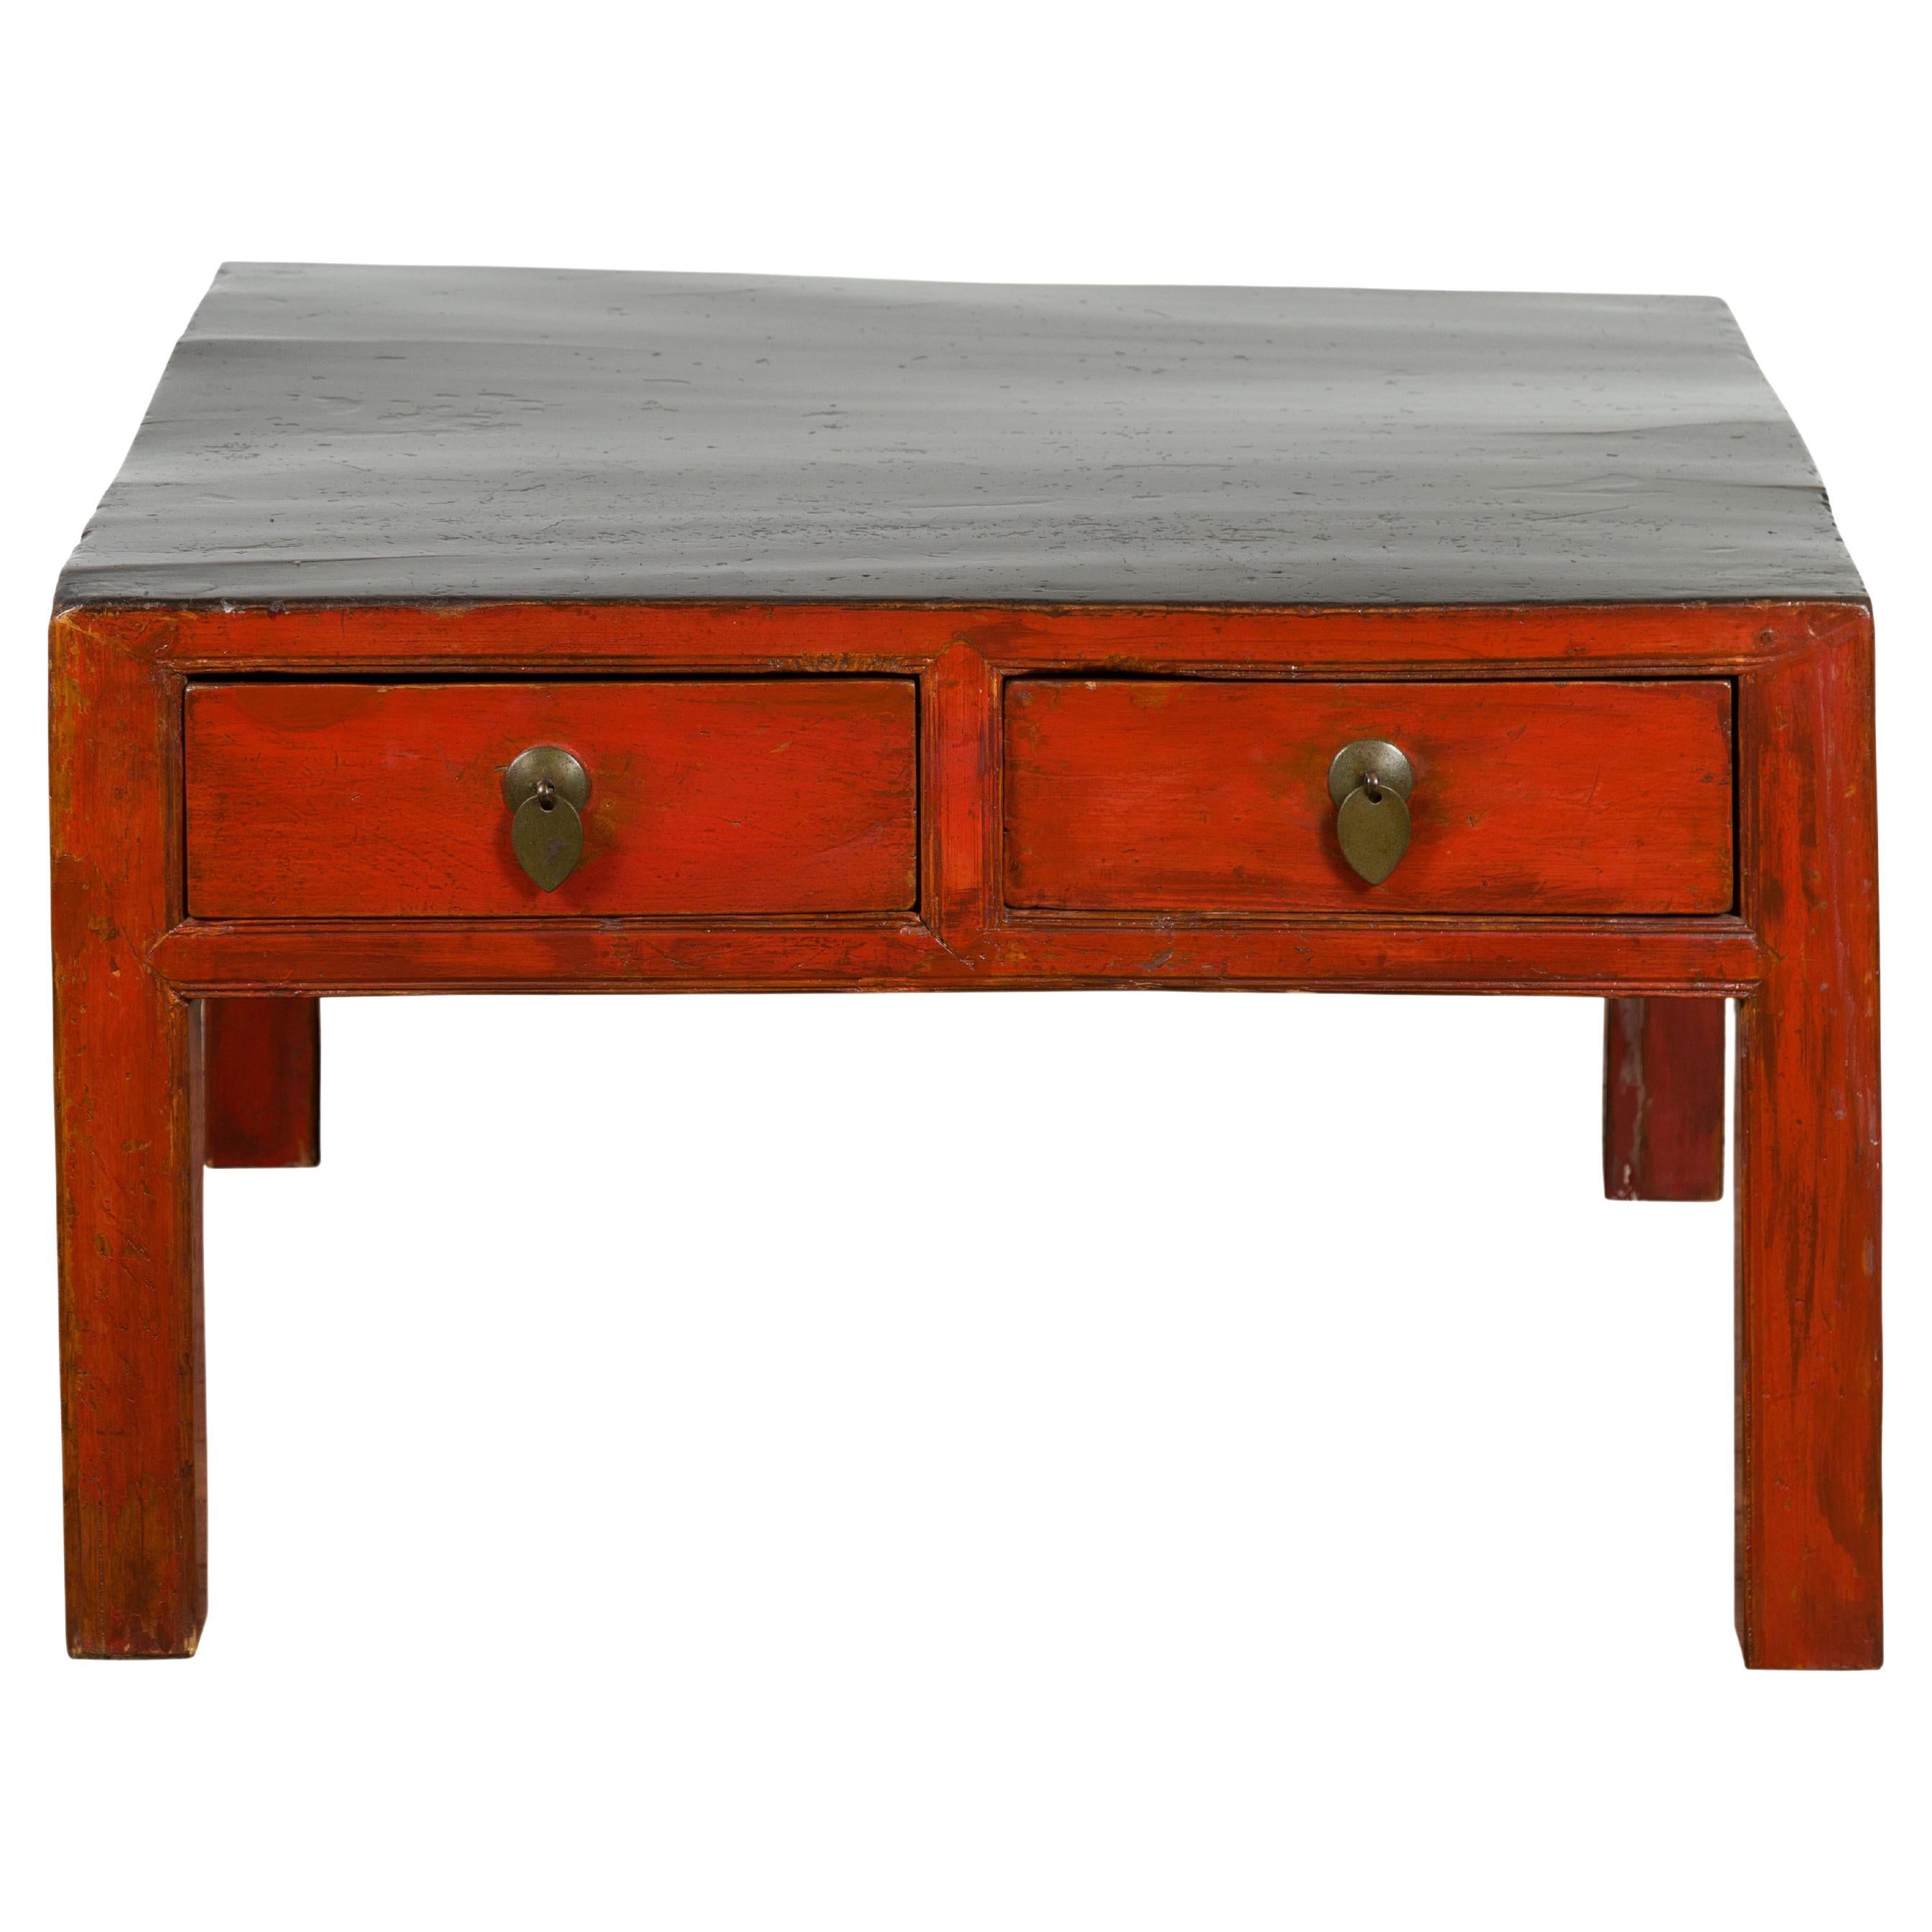 Red and Black Antique Coffee Table with Two Drawers